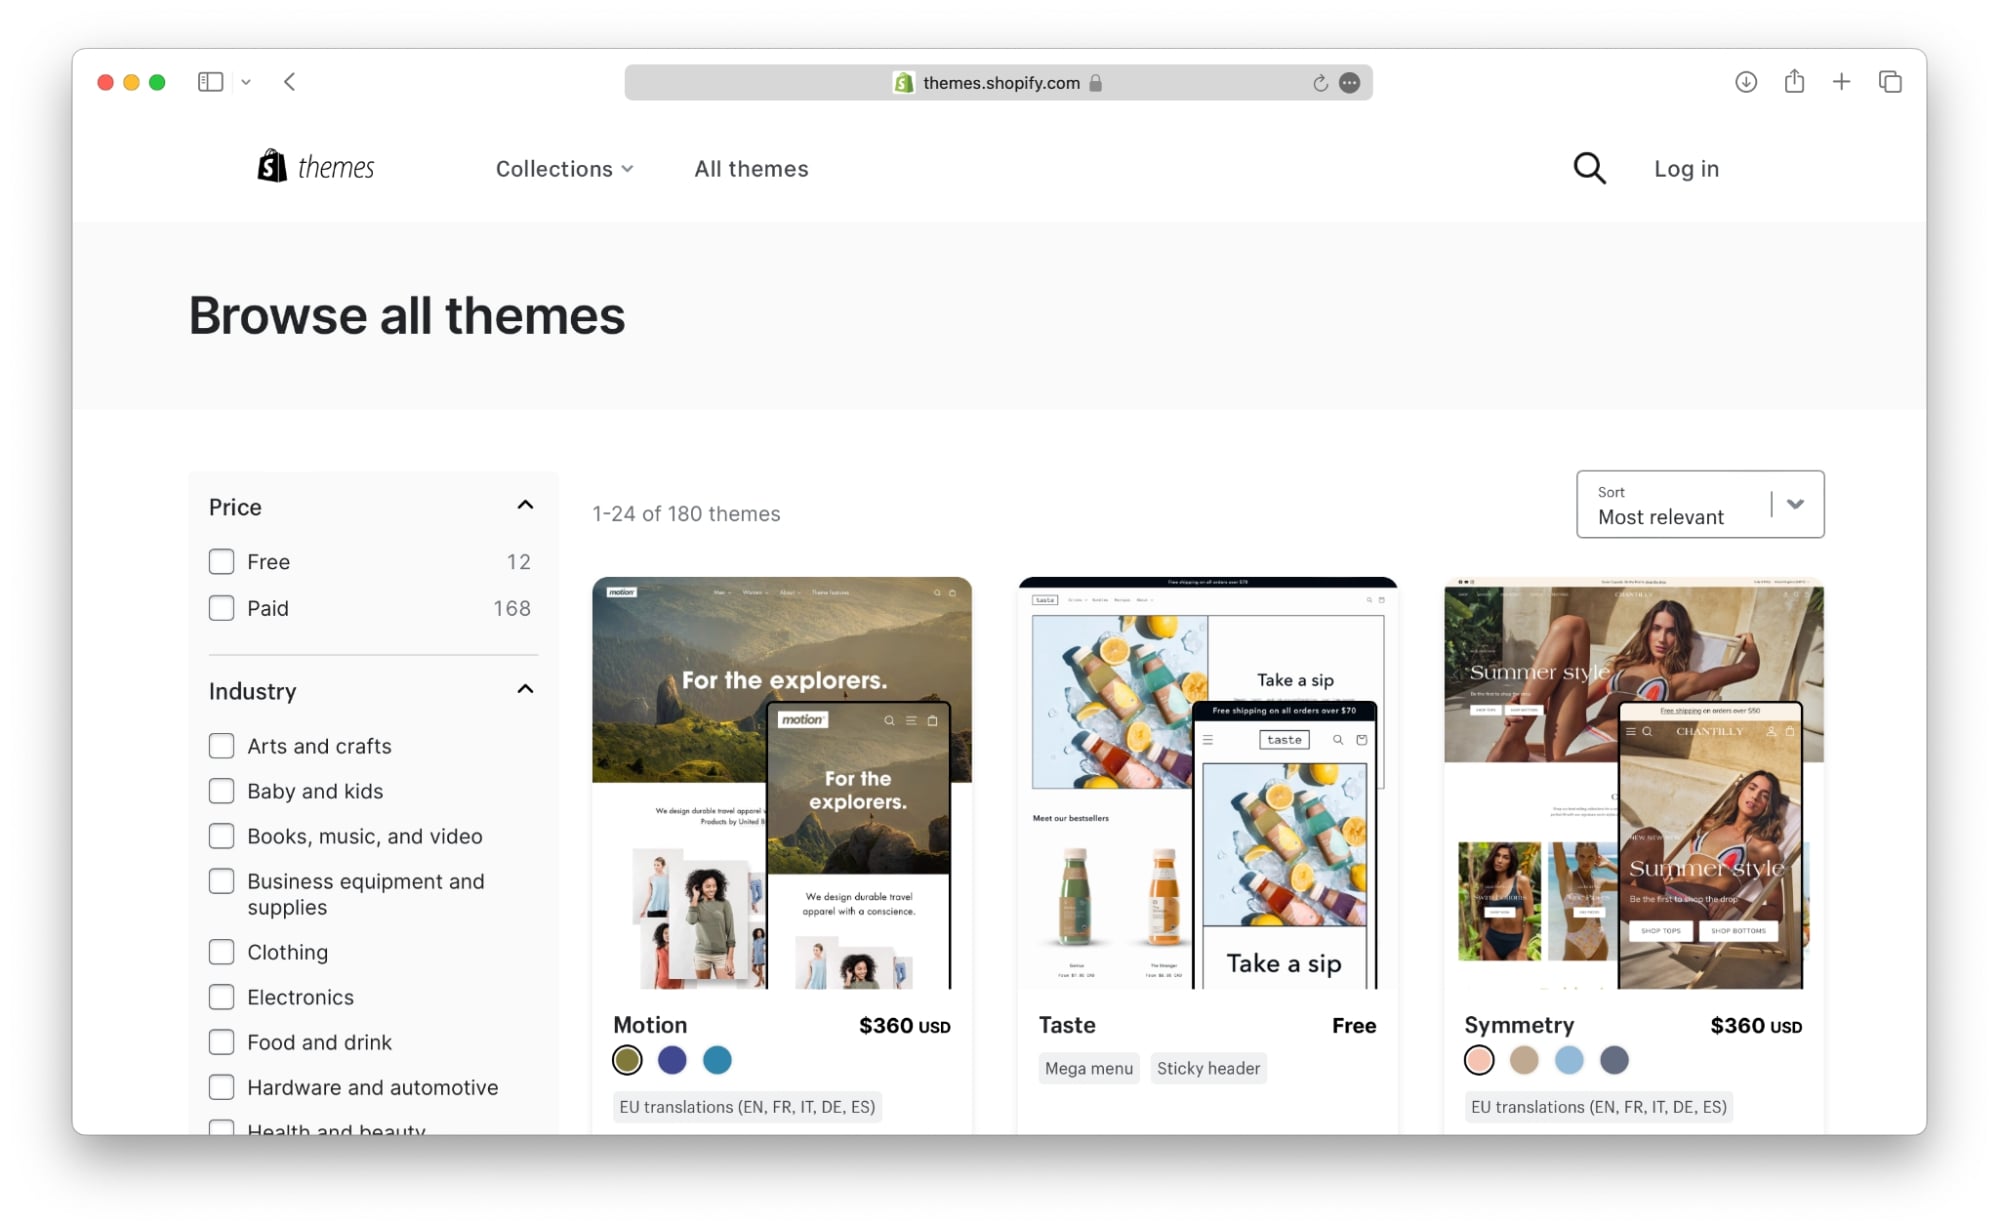 Shopify themes store for ready-to-use templates.